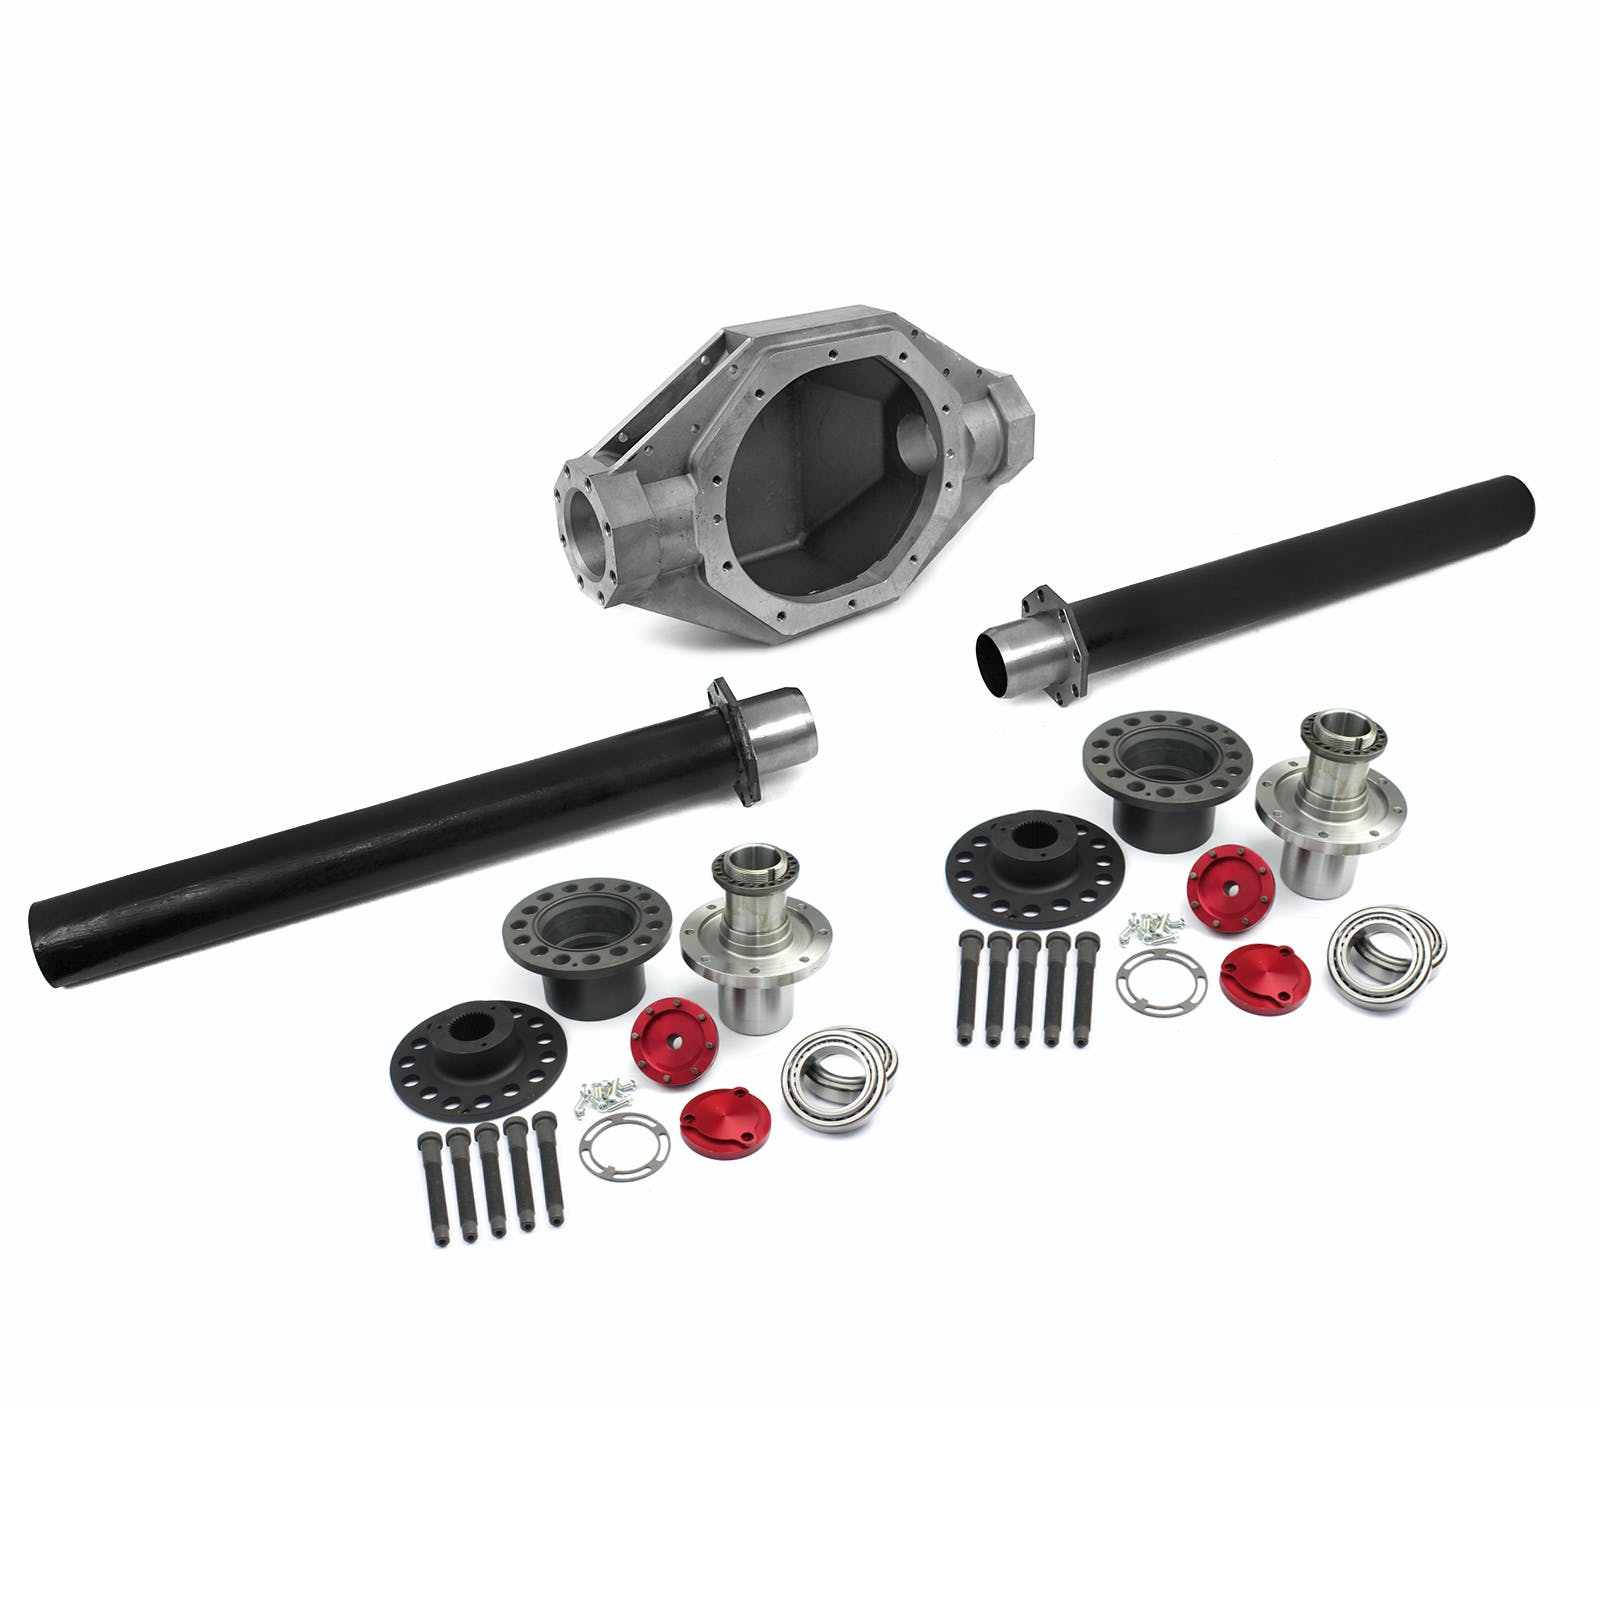 Speedmaster PCE210.1008 9 Modular Differential Housing Section, Tubes and Floater Kit